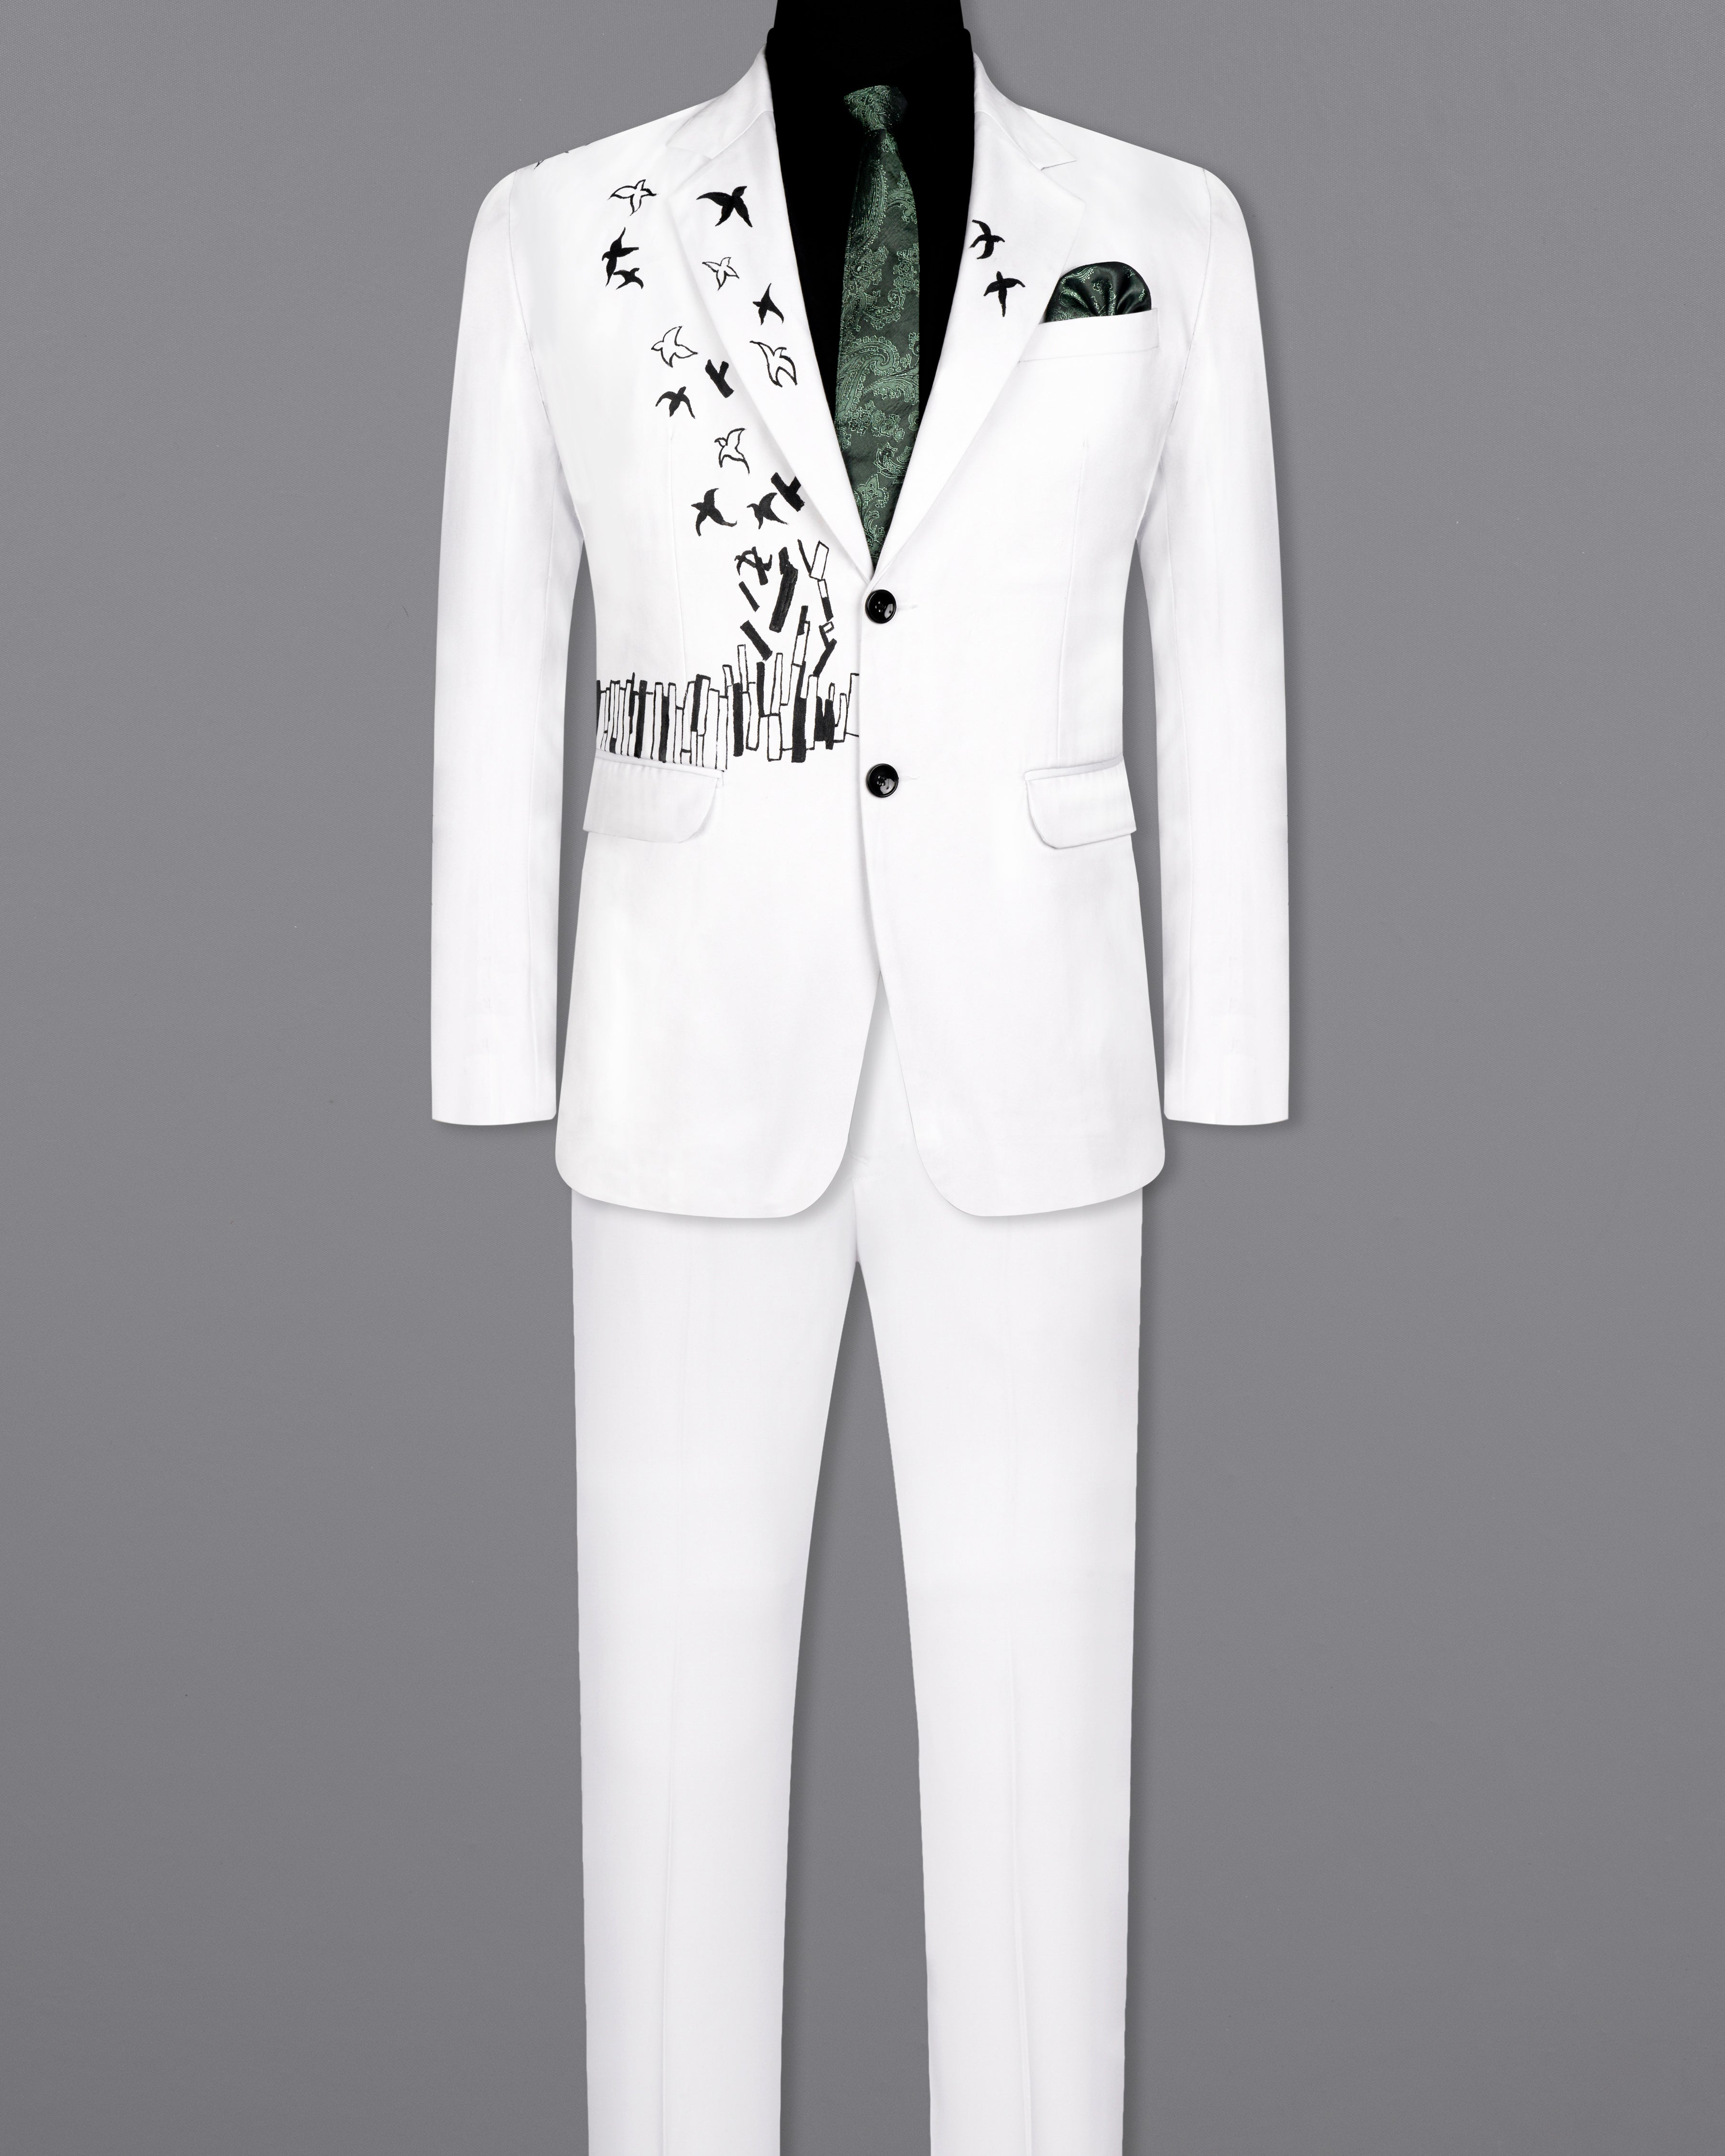 Bright White With Attractive Hand Painted Single Breasted Designer Suit ST2621-SB-ART-36, ST2621-SB-ART-38, ST2621-SB-ART-40, ST2621-SB-ART-42, ST2621-SB-ART-44, ST2621-SB-ART-46, ST2621-SB-ART-48, ST2621-SB-ART-50, ST2621-SB-ART-52, ST2621-SB-ART-54, ST2621-SB-ART-56, ST2621-SB-ART-58, ST2621-SB-ART-60